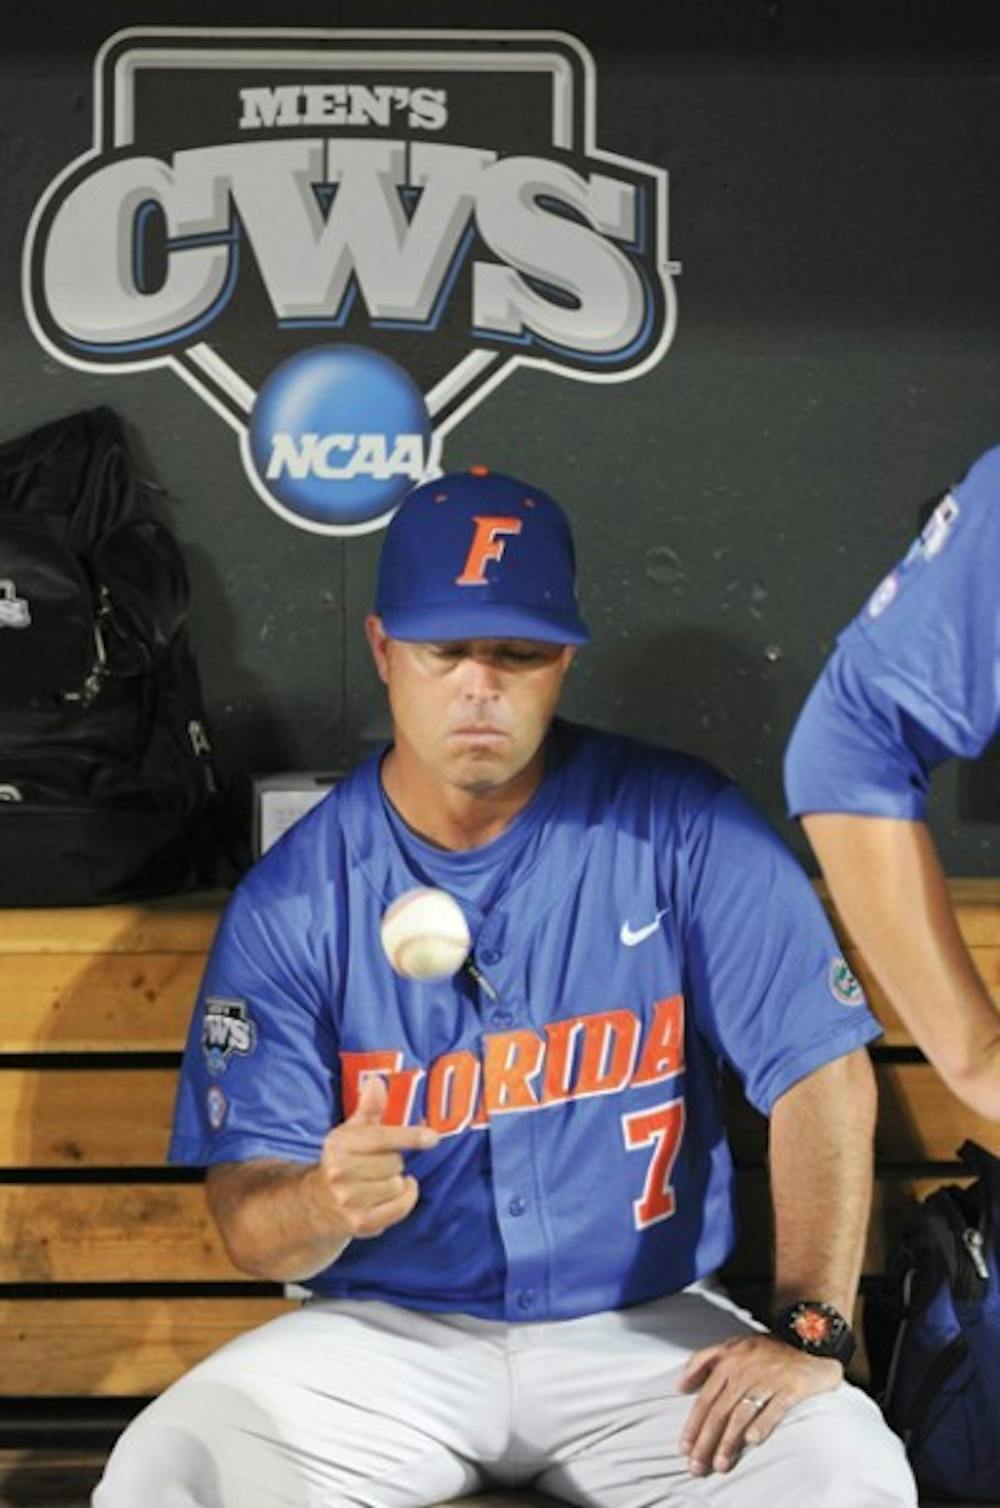 <p>Florida coach Kevin O'Sullivan tosses a ball while sitting in the dugout after South Carolina beat Florida 5-2 in Game 2 of the NCAA baseball College World Series best-of-three finals, to win the championship, in Omaha, Neb., Tuesday, June 28, 2011.</p>